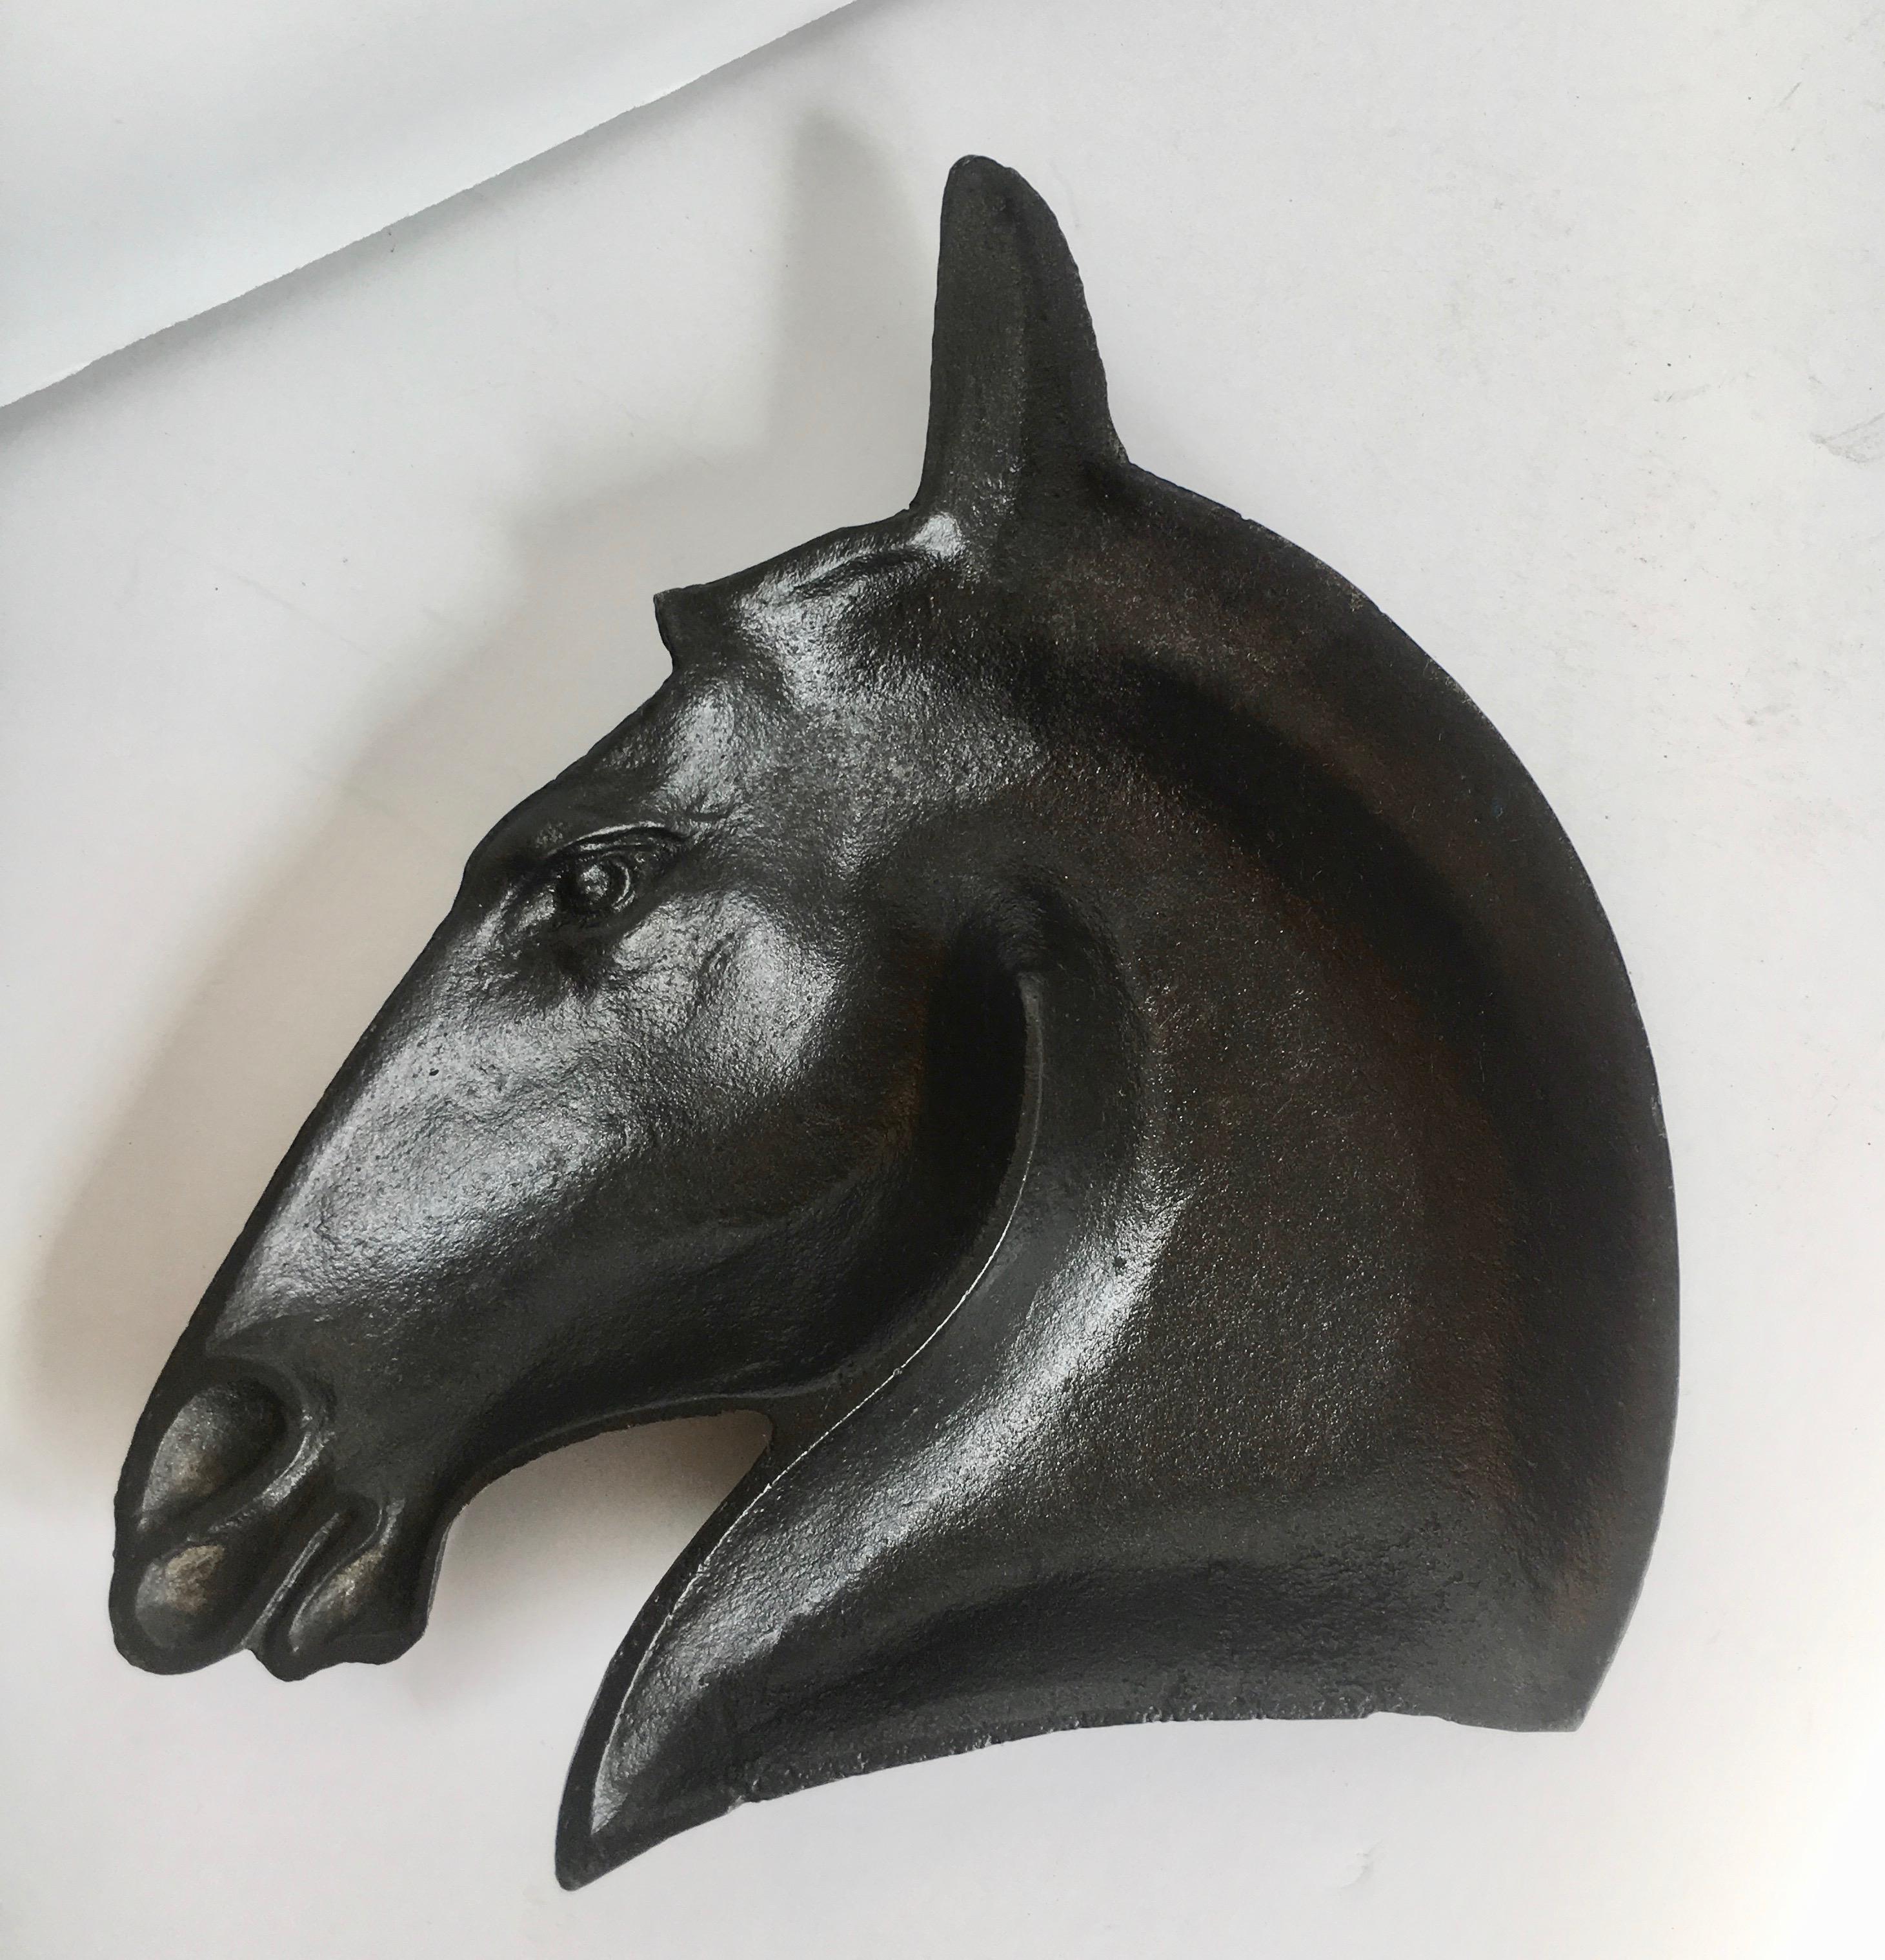 Japanese iron horse head bowl - a beautifully designed iron horse sculptural bowl. Handsome enough to sit alone - or for nuts, paperclips, candy, change, 420, etc. Very similar to the Walter Bosse design, only cleaner 

Stamped Japan with Japanese